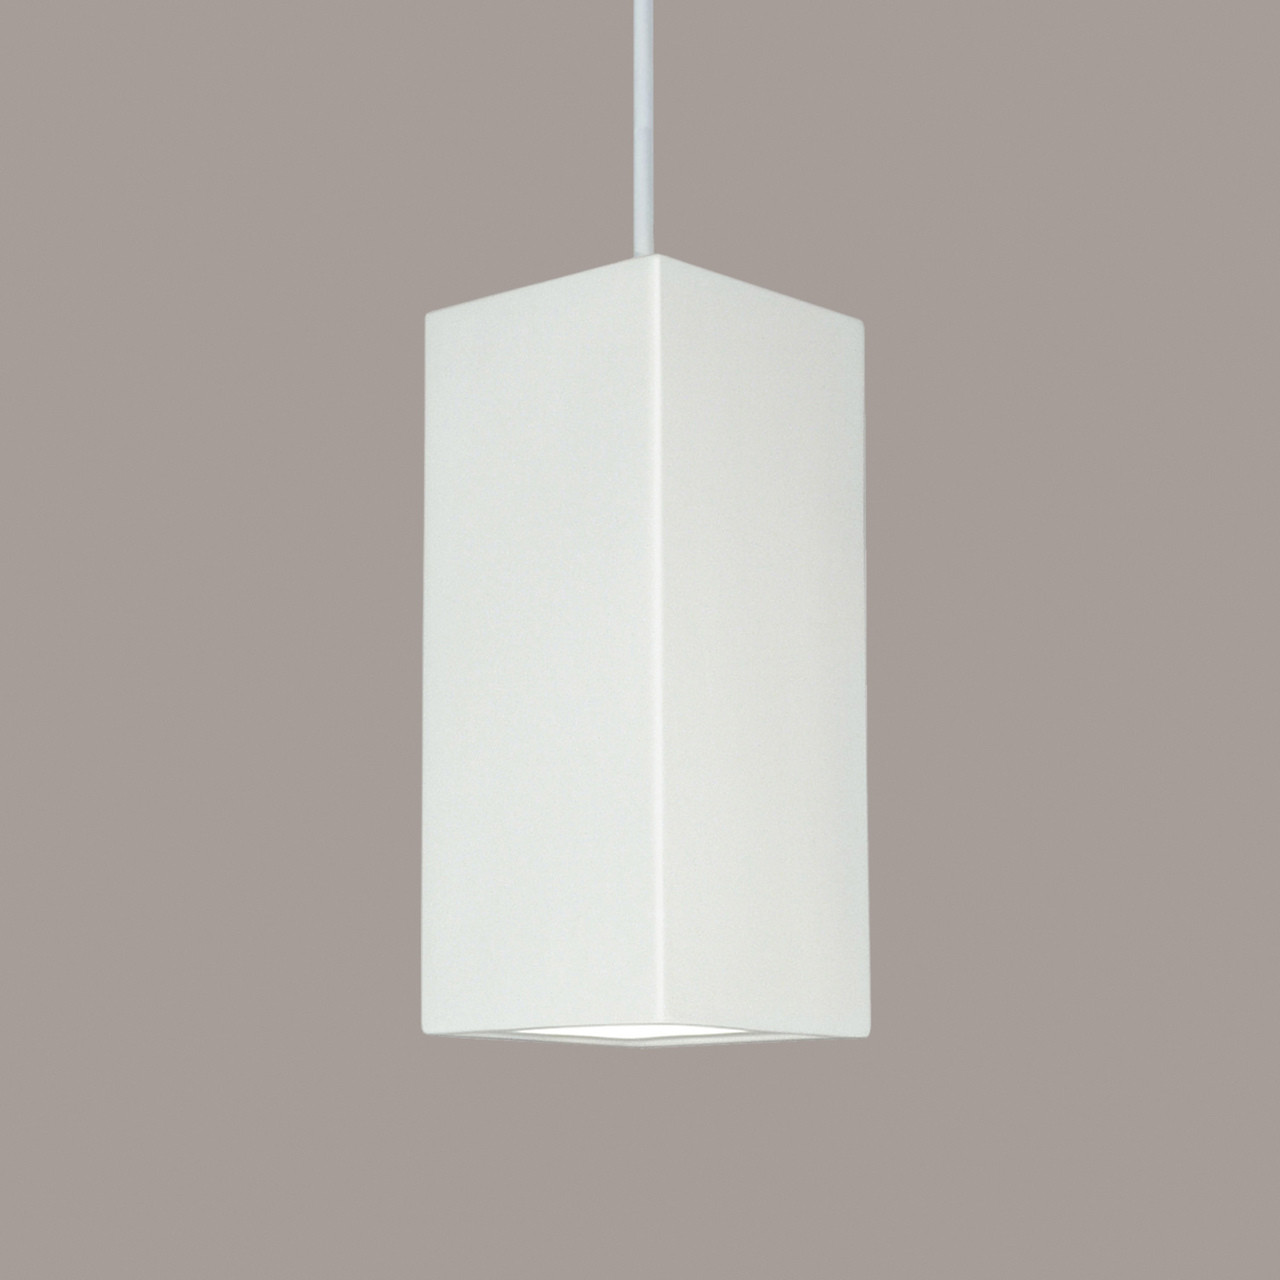 A19 Lighting P1802-WCC 1-Light Gran Timor Pendant: Bisque (White Cord & Canopy)